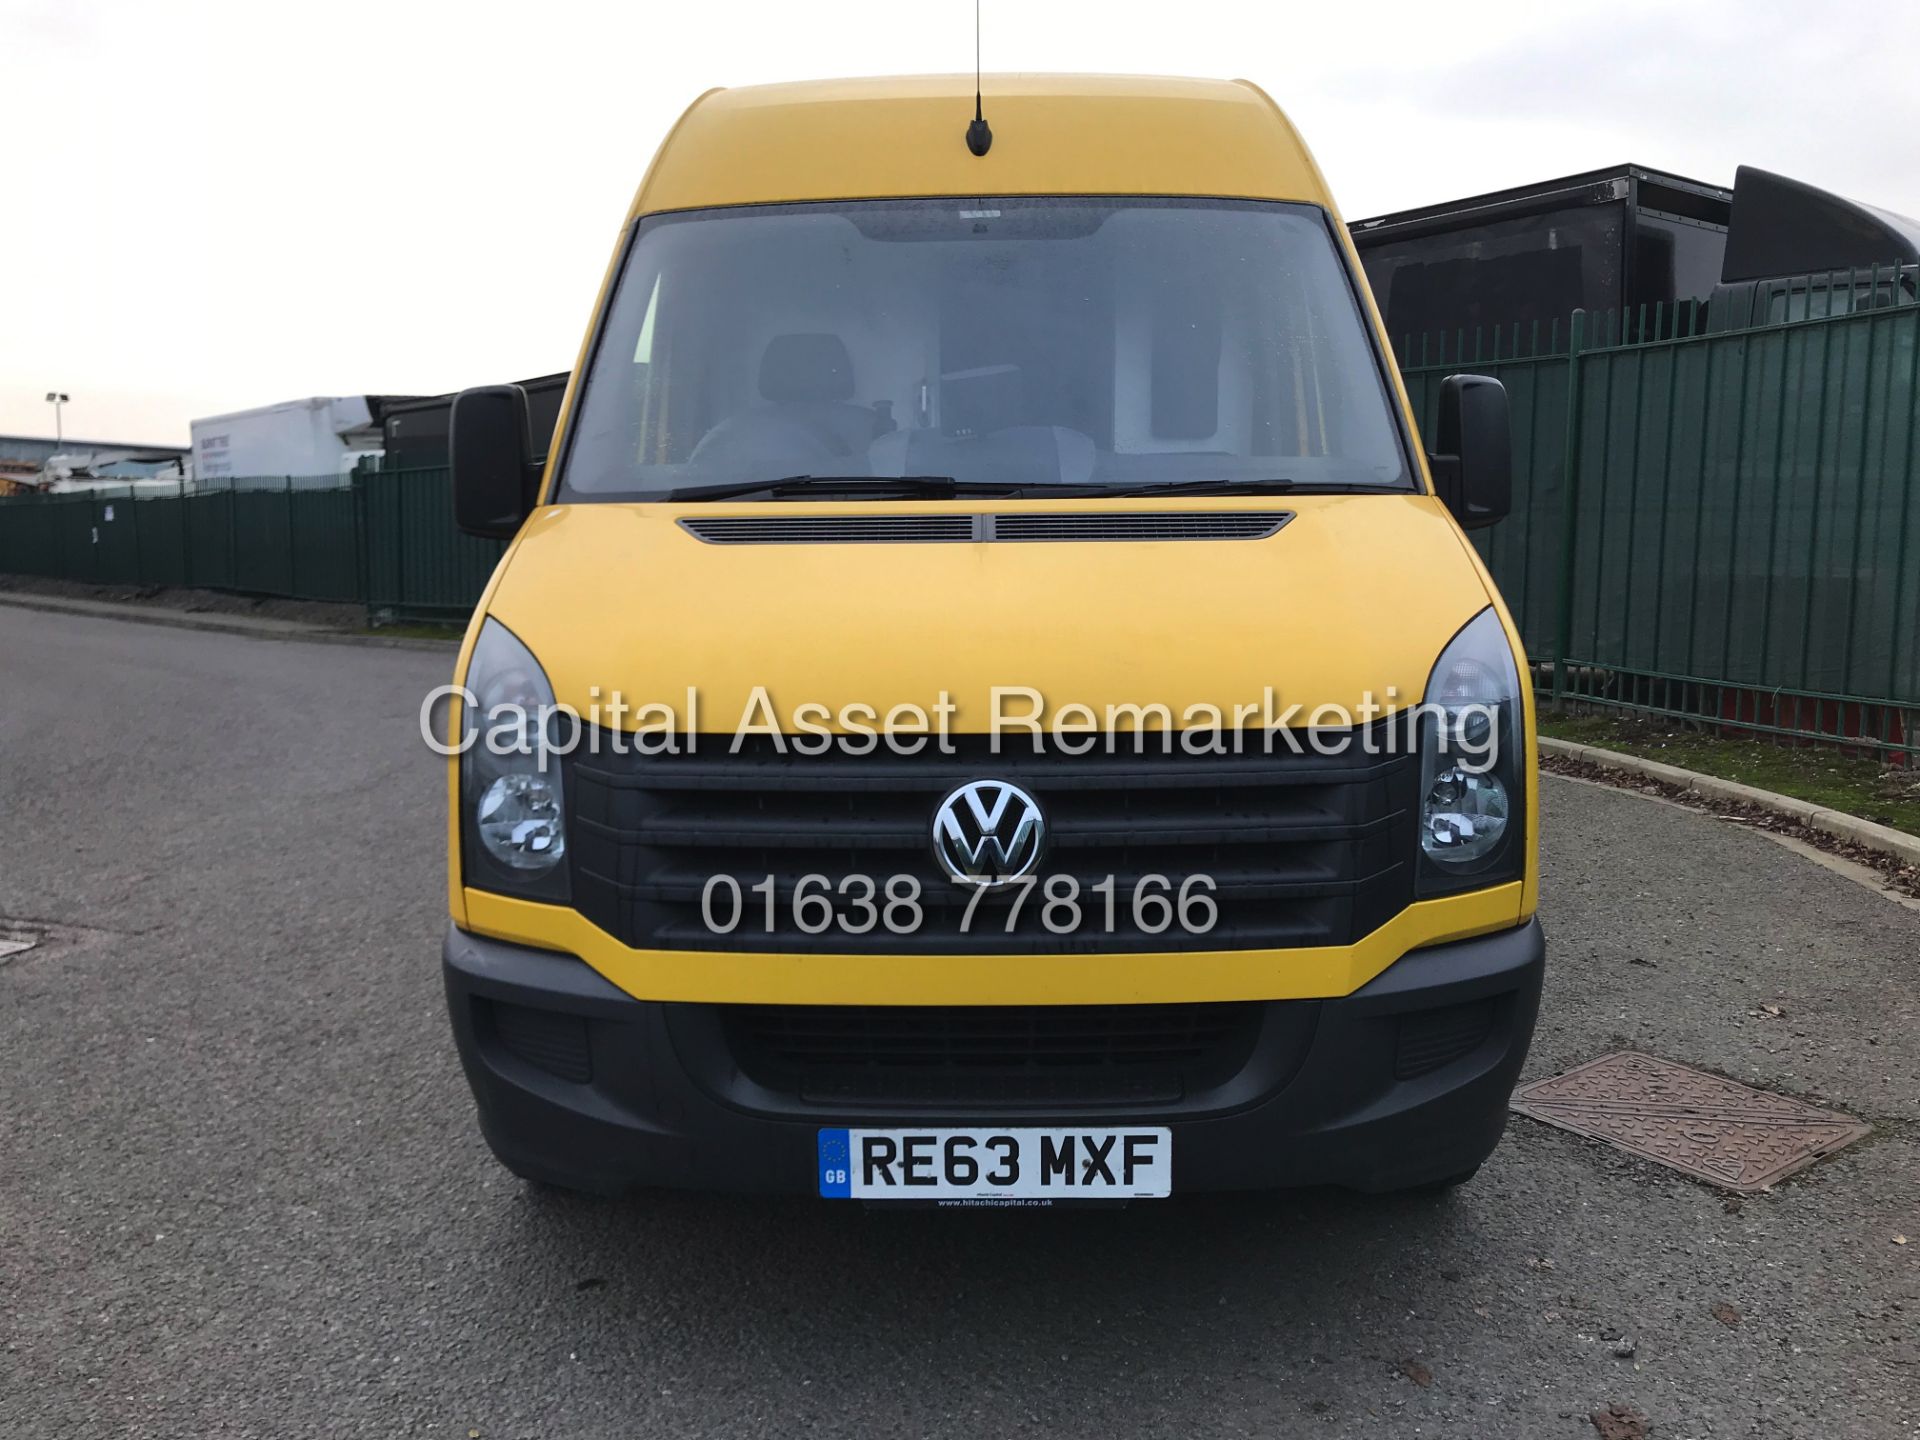 (On Sale) VOLKSWAGEN CRAFTER 2.0TDI CR35 "136BHP" MWB (2014 MODEL) 1 OWNER - AIR CON - FSH - Image 2 of 10